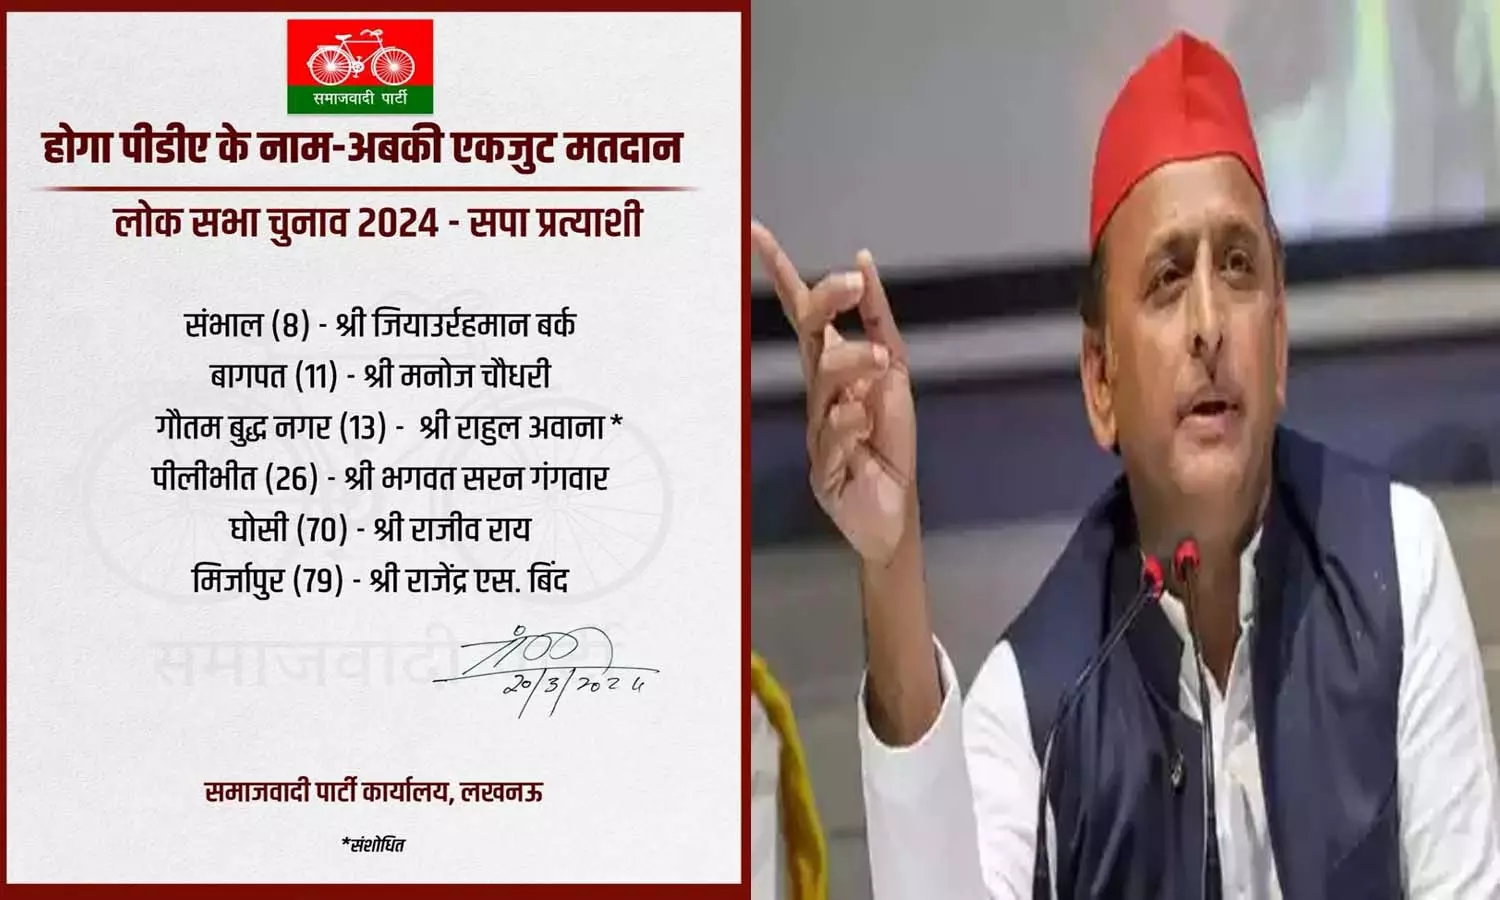 SP announced names of candidates on six seats including Pilibhit, Sambhal, Baghpat